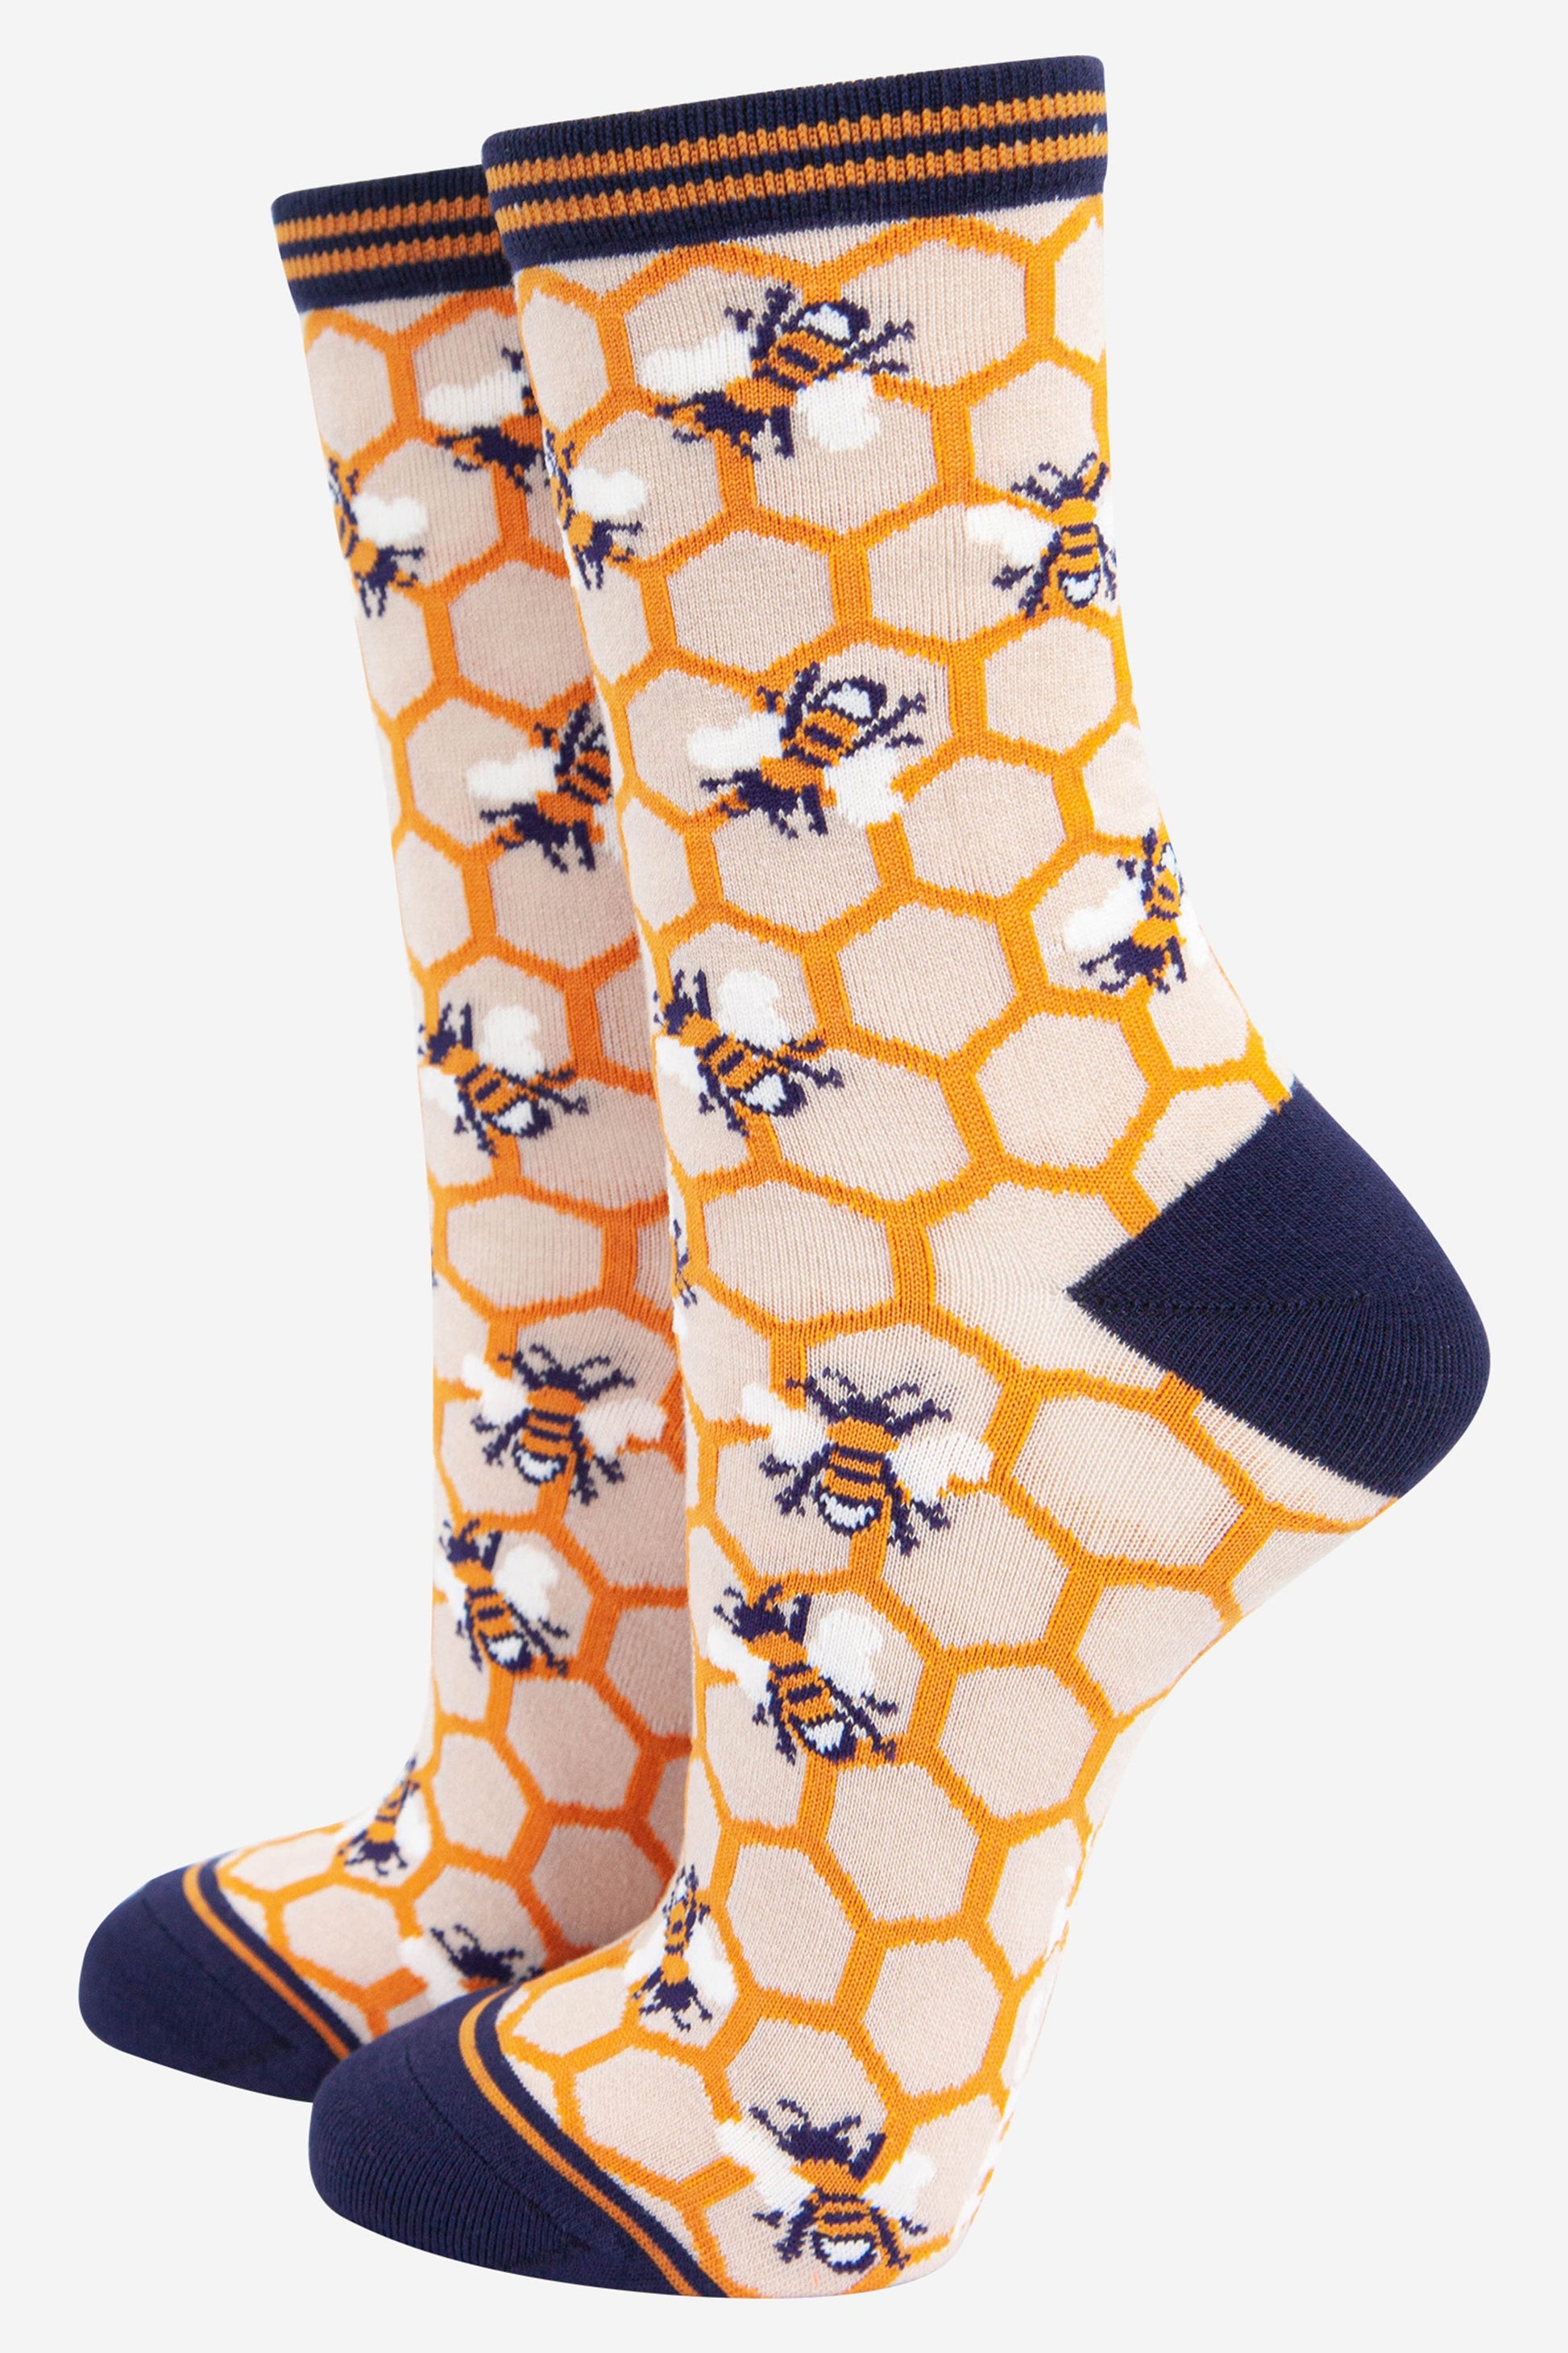 yellow and cream bamboo ankle socks with an all over yellow honeycomb pattern and scattered bees